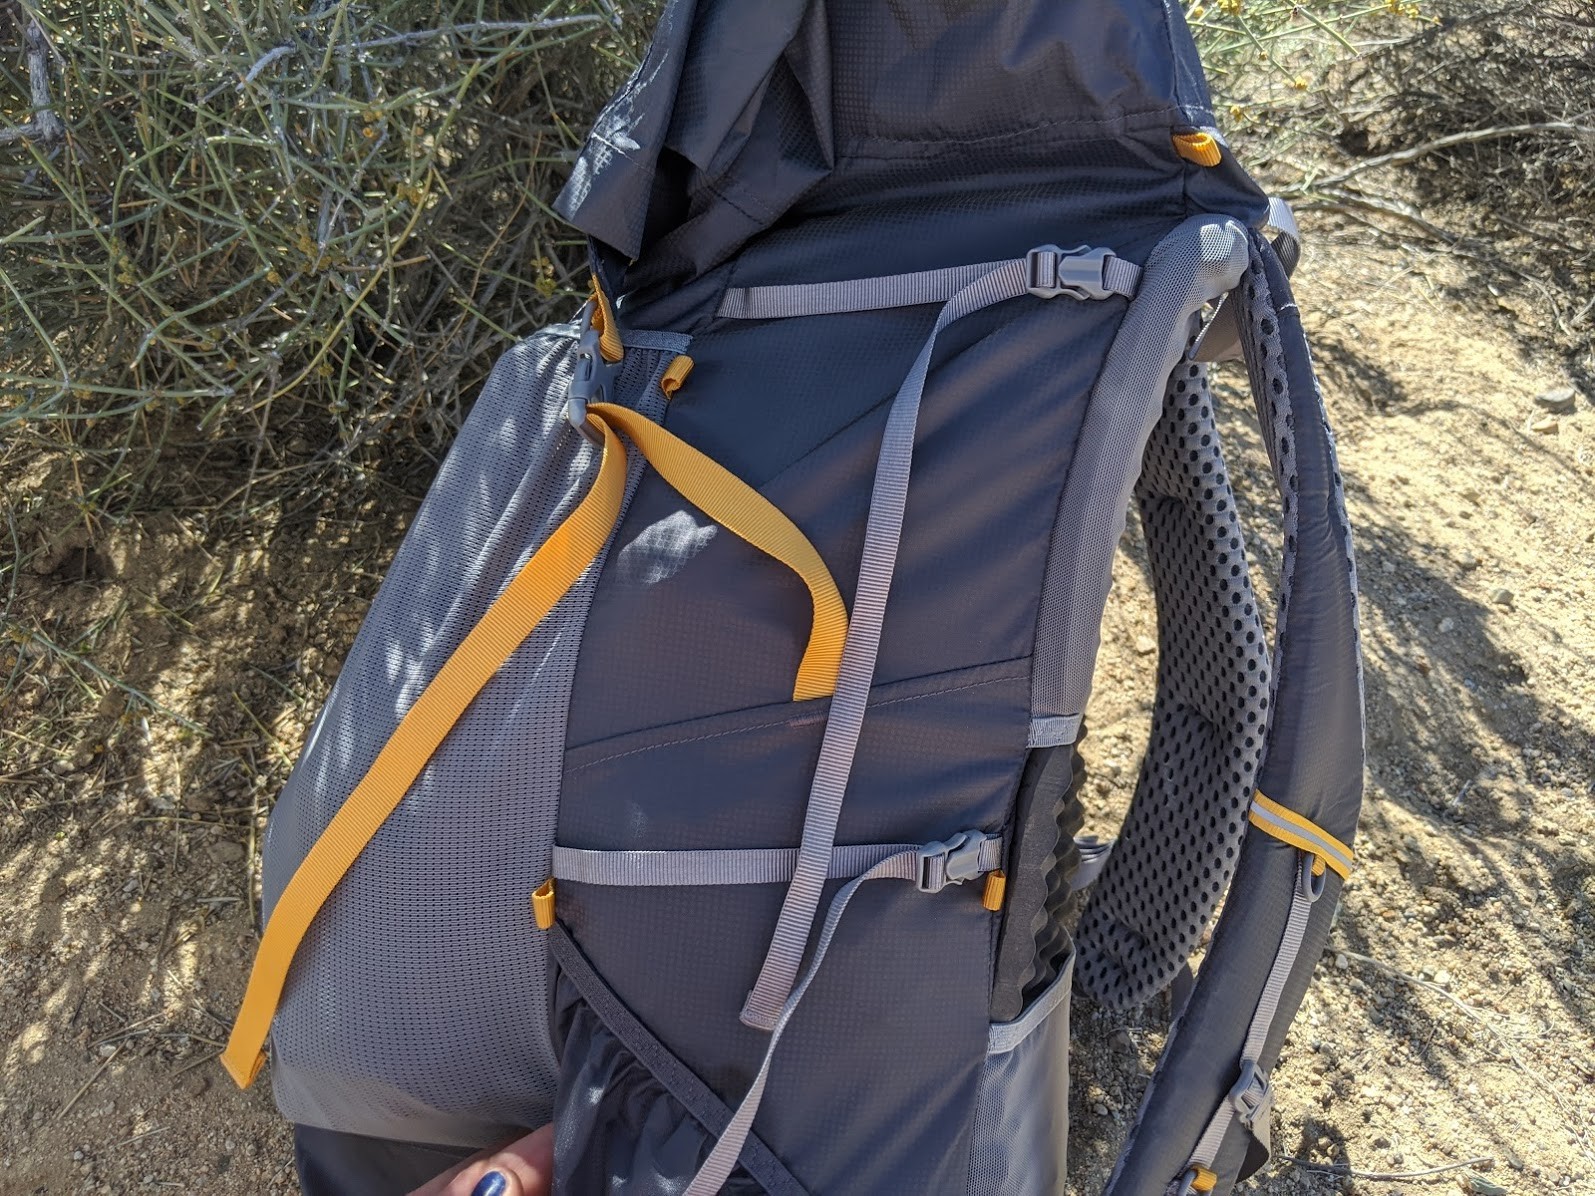 Gossamer Gear Gorilla 50 Review | Tested & Rated